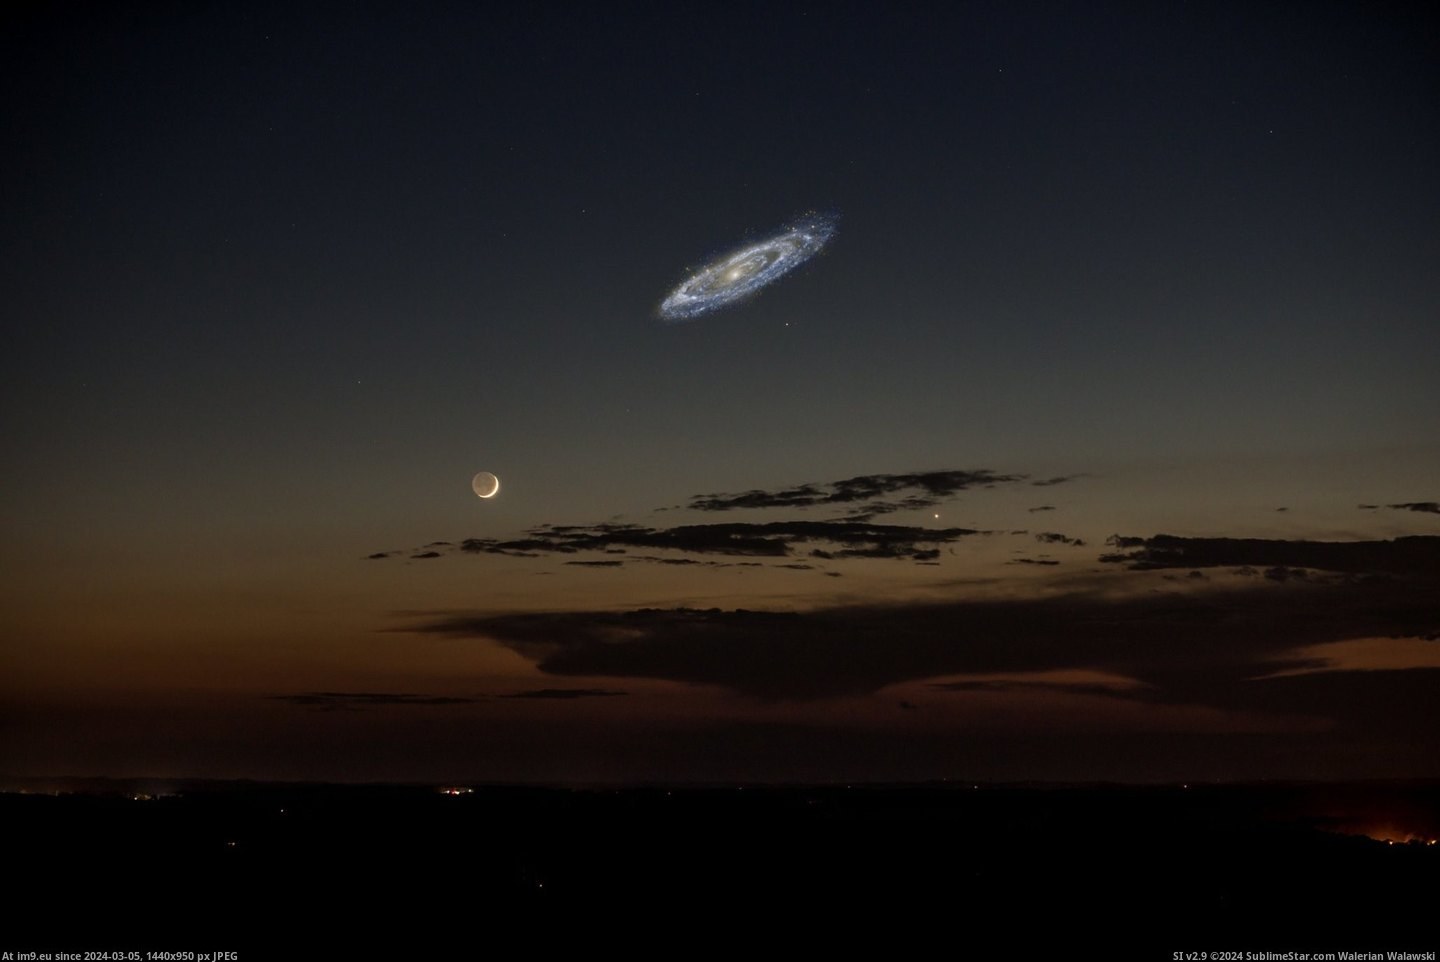 #Size #Andromeda #Brighter #Actual [Pics] Andromeda's actual size if it were brighter Pic. (Image of album My r/PICS favs))